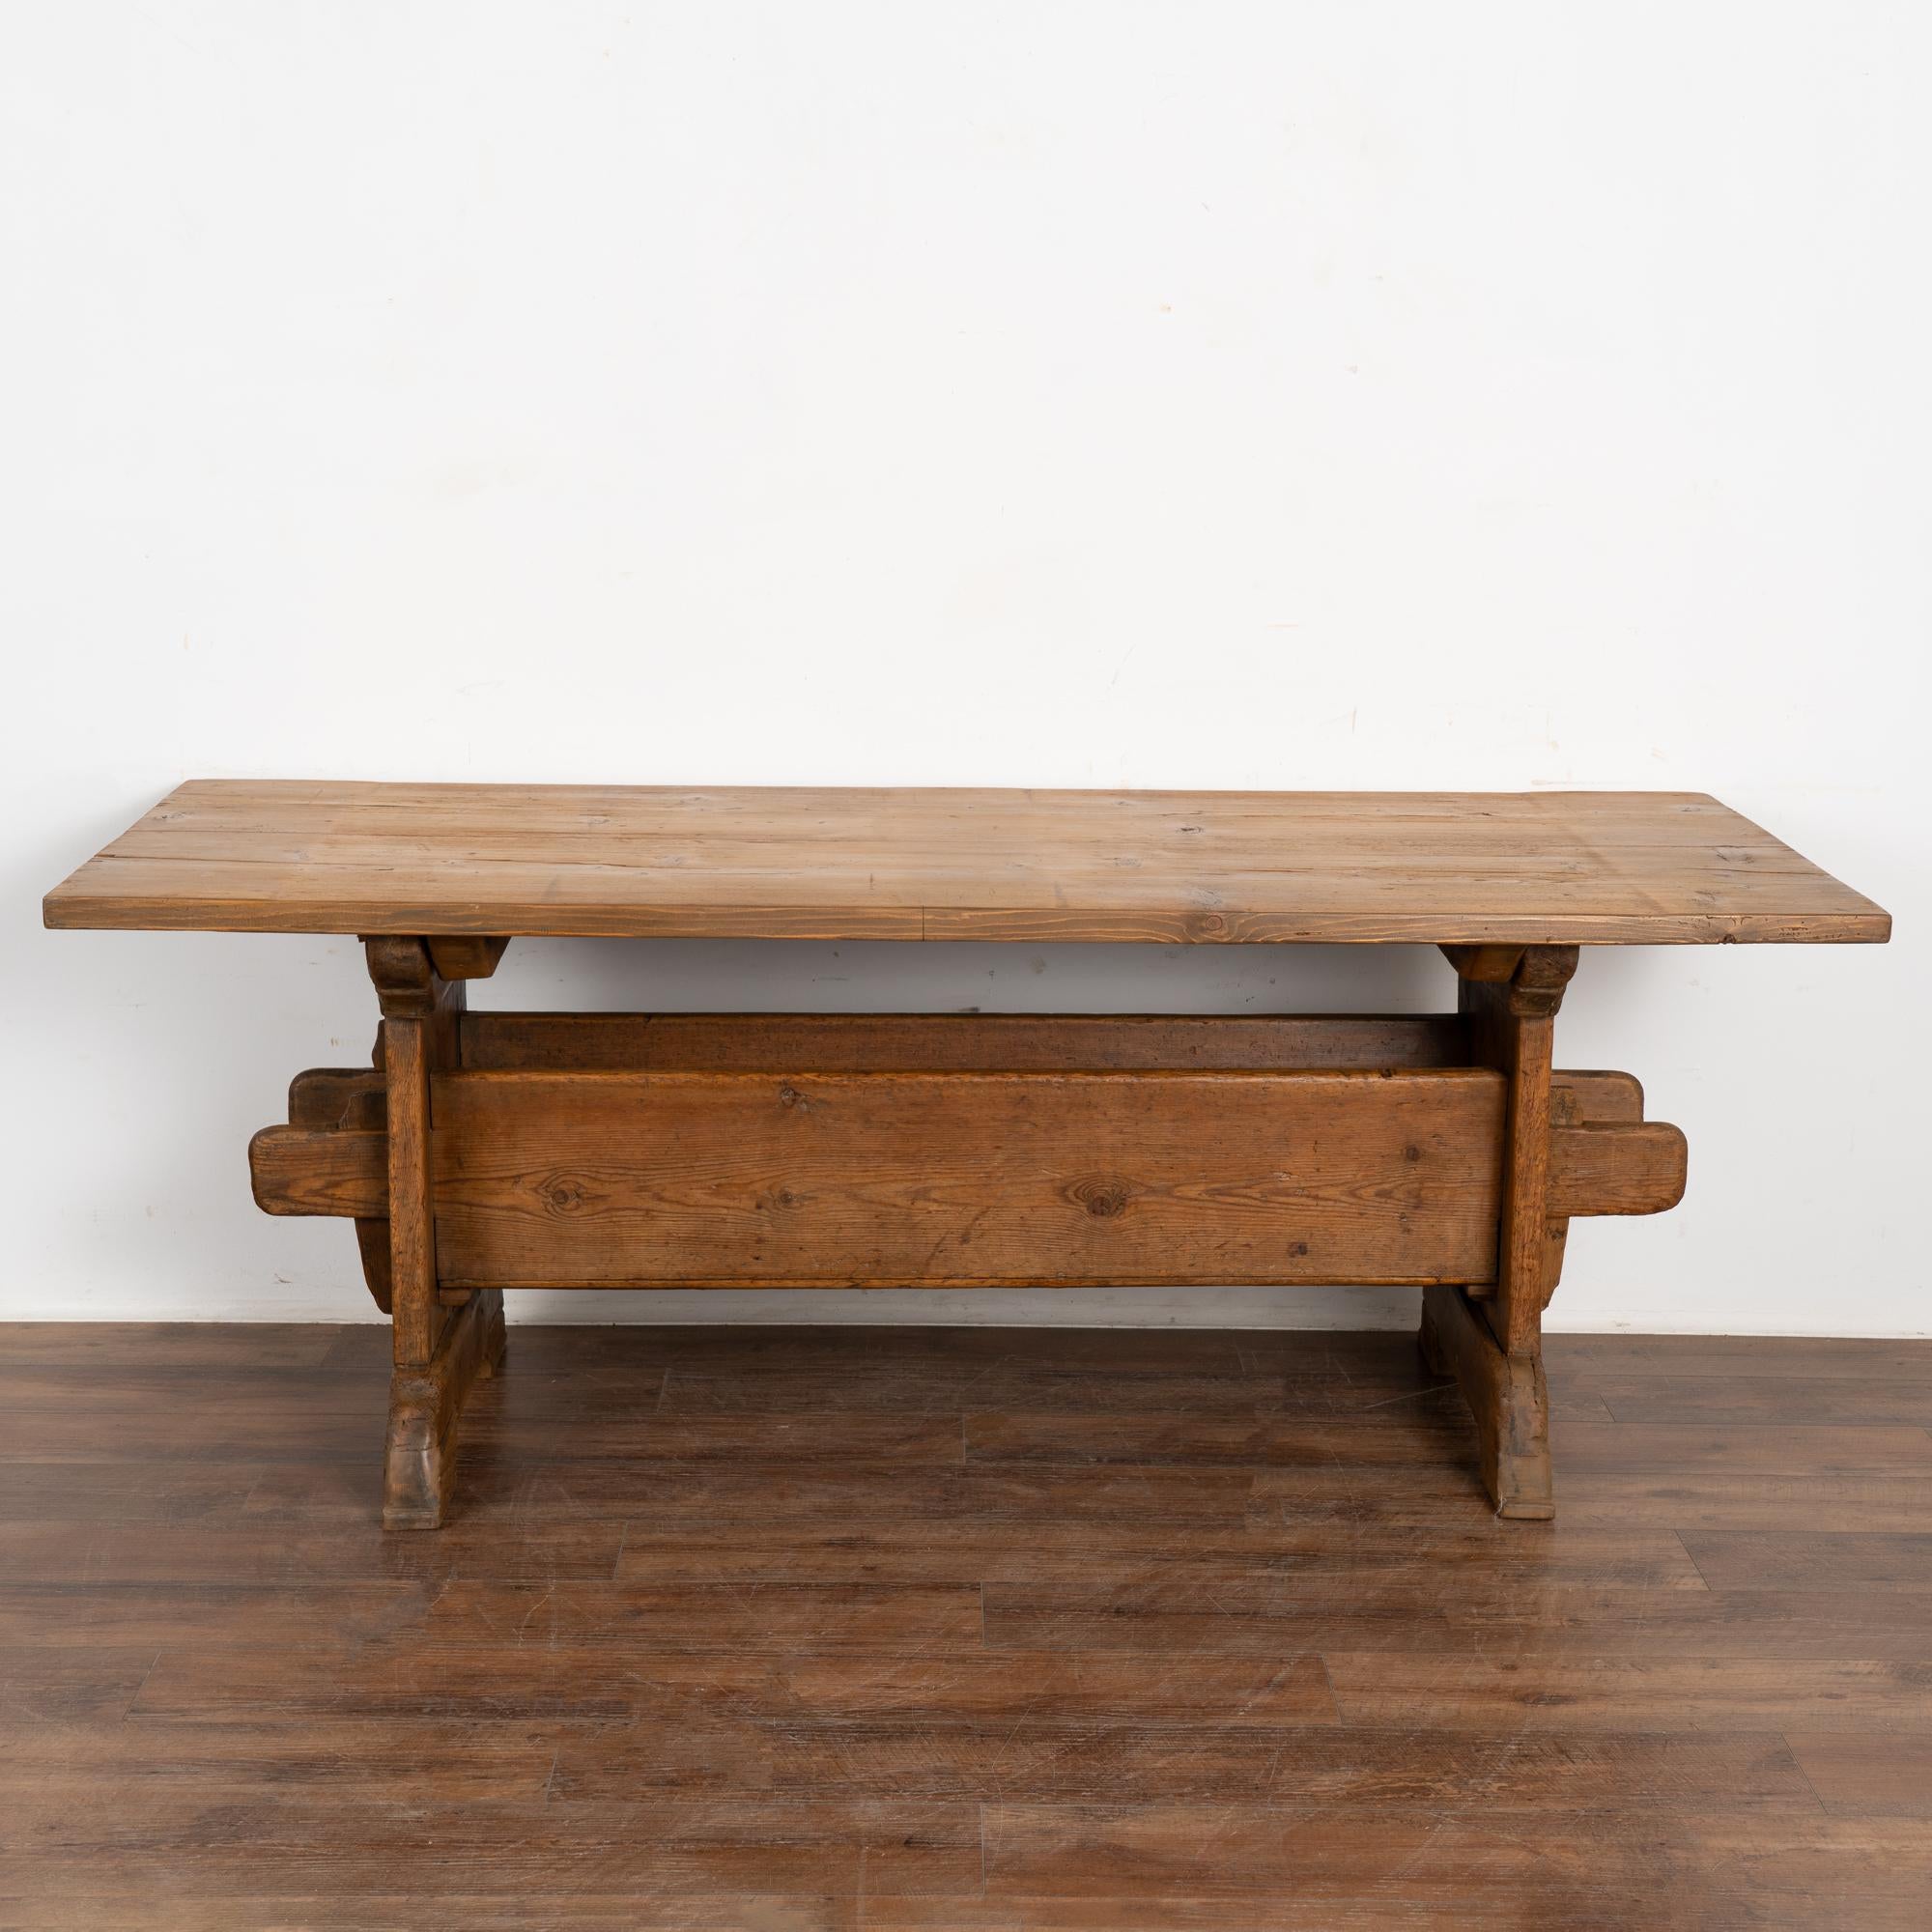 Country Antique Pine Farm Kitchen Dining Table, Sweden circa 1800-20 For Sale